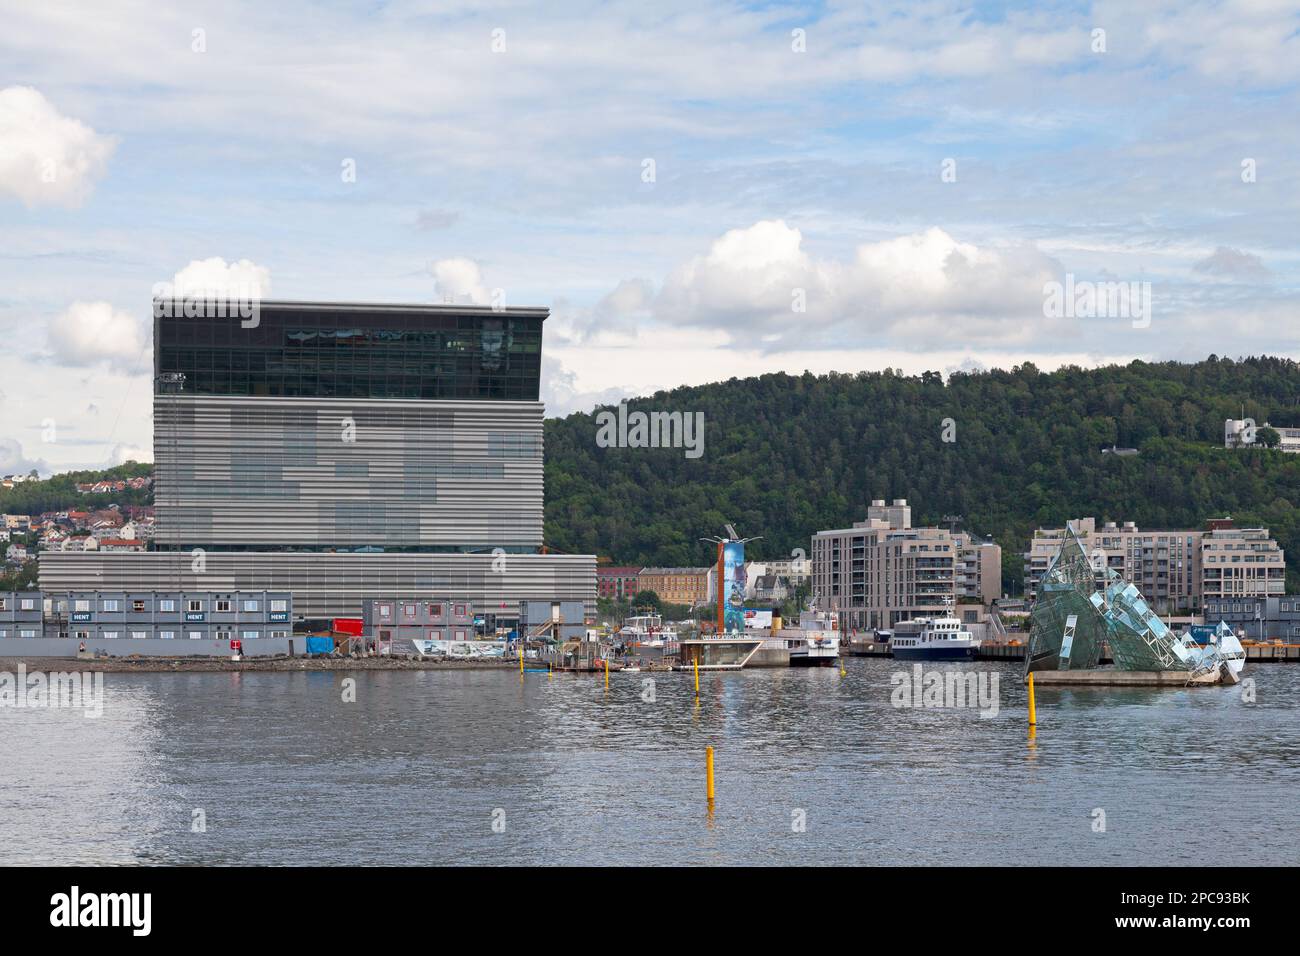 Oslo, Norway - June 26 2019: The Munch Museum at Bjørvika on the waterfront, next to the Oslo Opera House and She Lies. Stock Photo